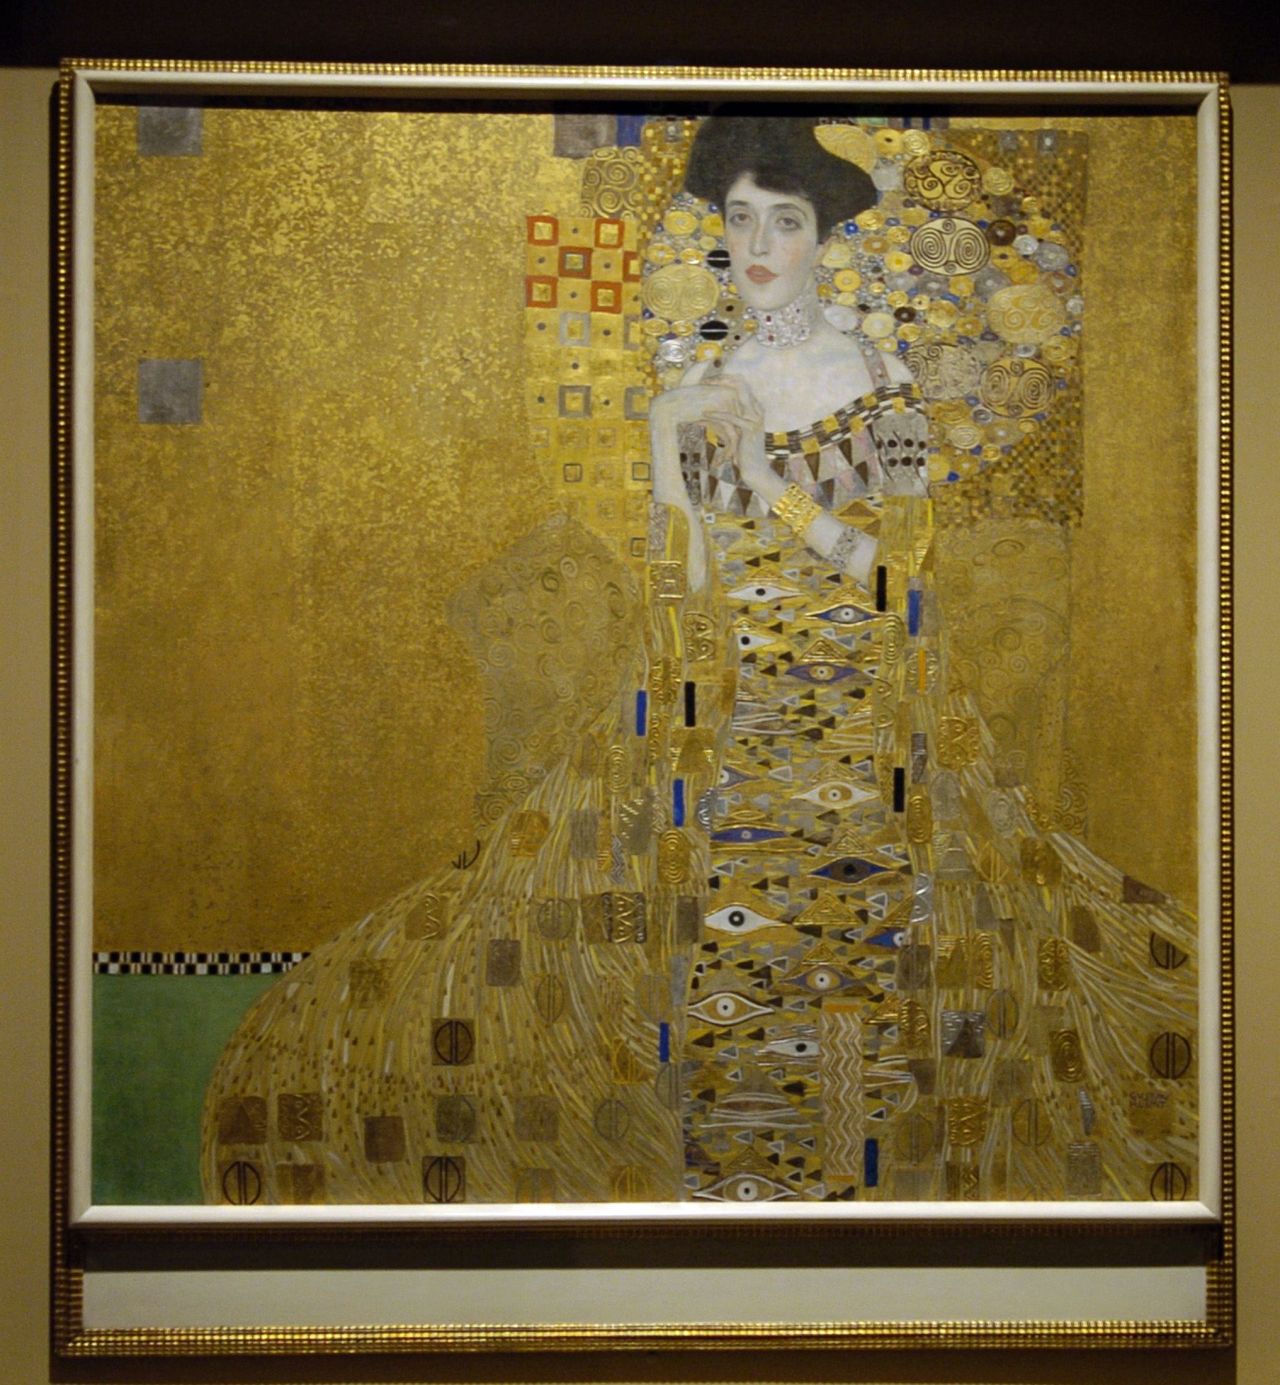 Among their many crimes, the Nazis plundered precious artworks as they gained power during World War II. "Adele Bloch-Bauer I," by Austrian artist Gustav Klimt, was confiscated from the owner when he fled from Austria.